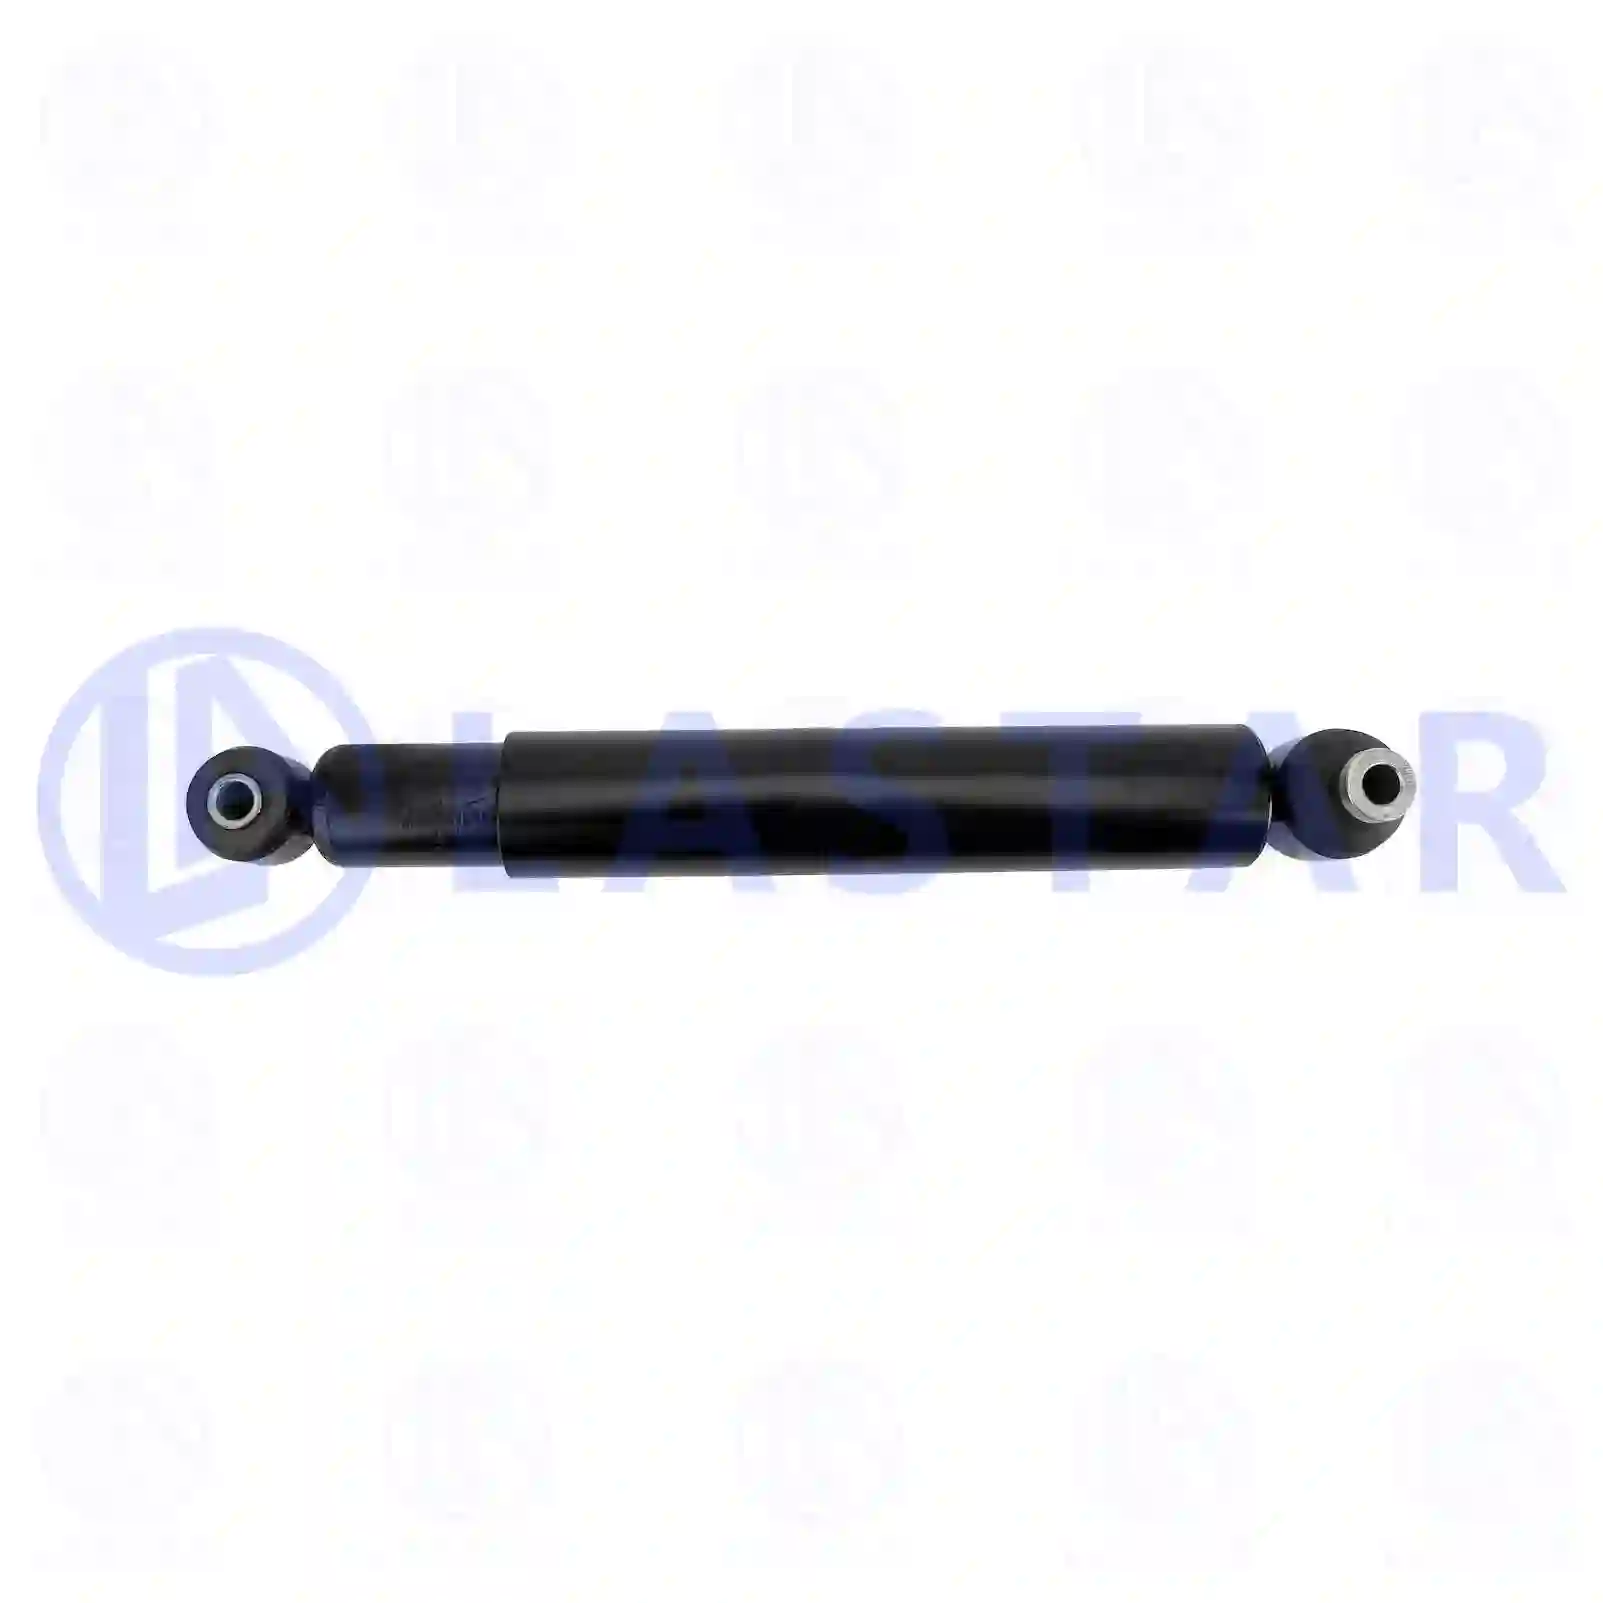 Shock absorber, 77727829, 0053260000, 0053263300, 0053263400, 9583260800, ZG41588-0008 ||  77727829 Lastar Spare Part | Truck Spare Parts, Auotomotive Spare Parts Shock absorber, 77727829, 0053260000, 0053263300, 0053263400, 9583260800, ZG41588-0008 ||  77727829 Lastar Spare Part | Truck Spare Parts, Auotomotive Spare Parts